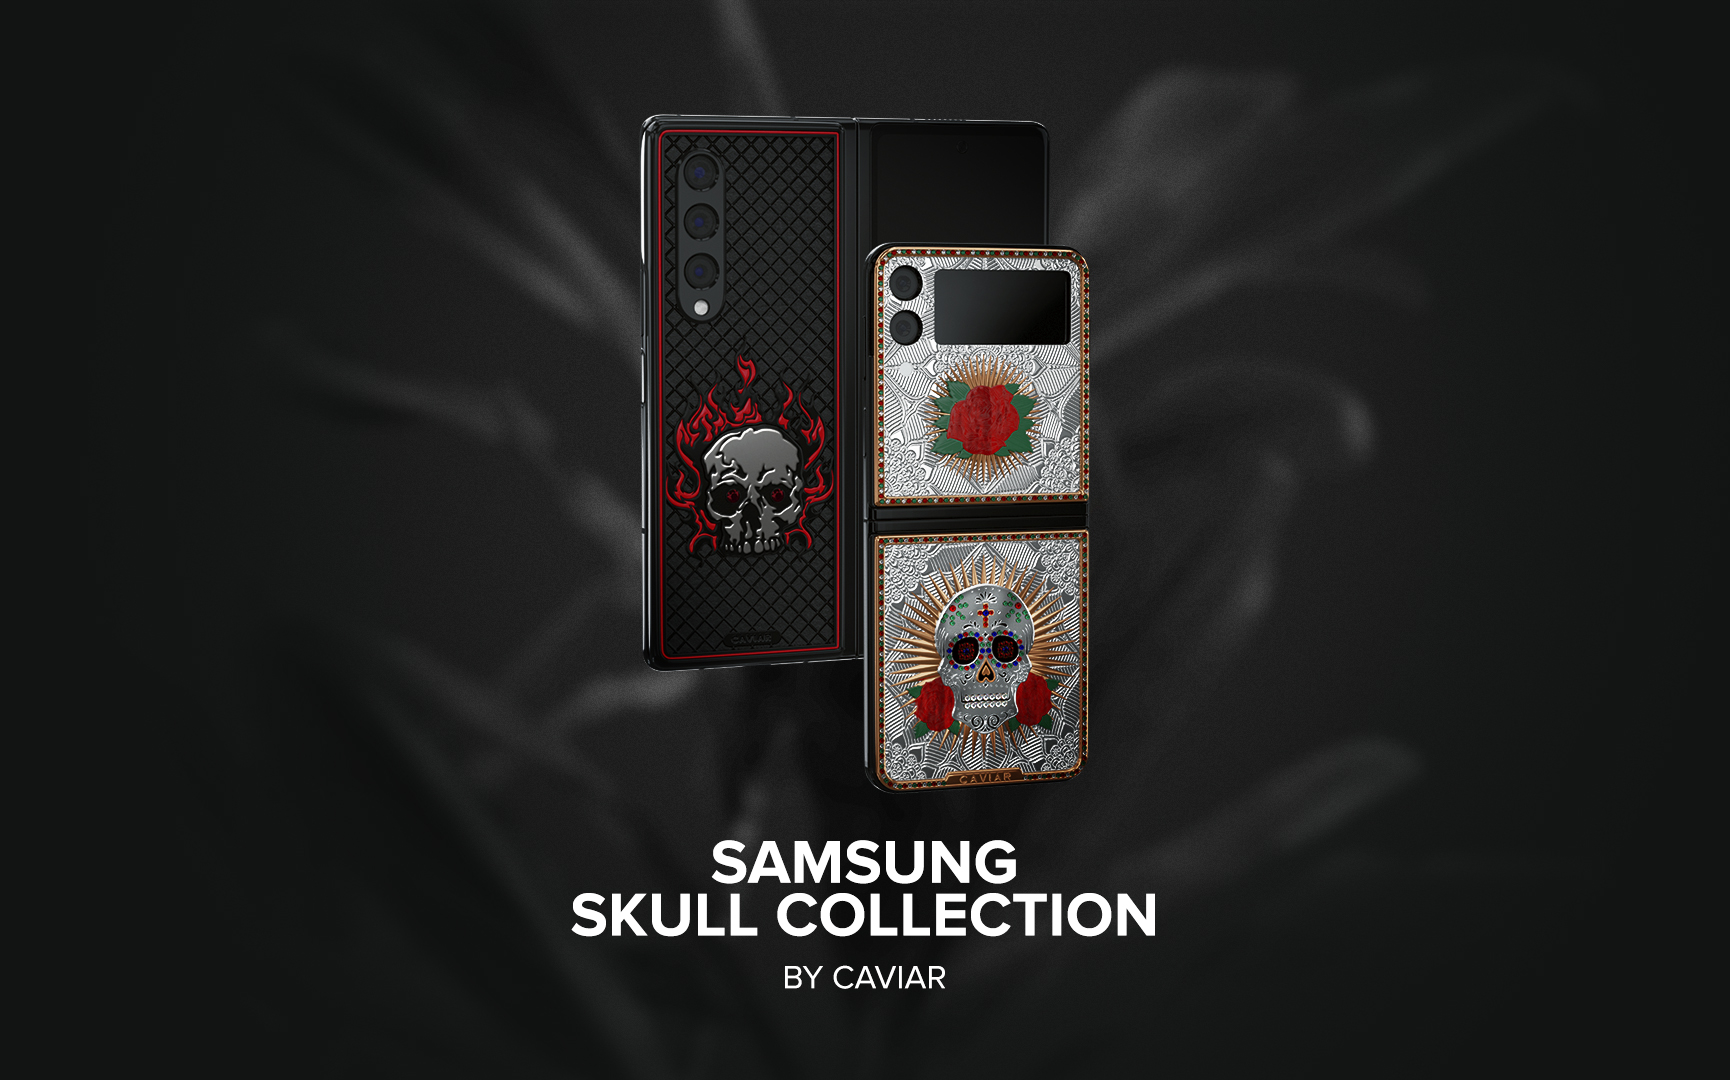 Caviar will decorate the luxury versions of the Samsung Z-Fold 3 and Z-Flip 3 with skulls.